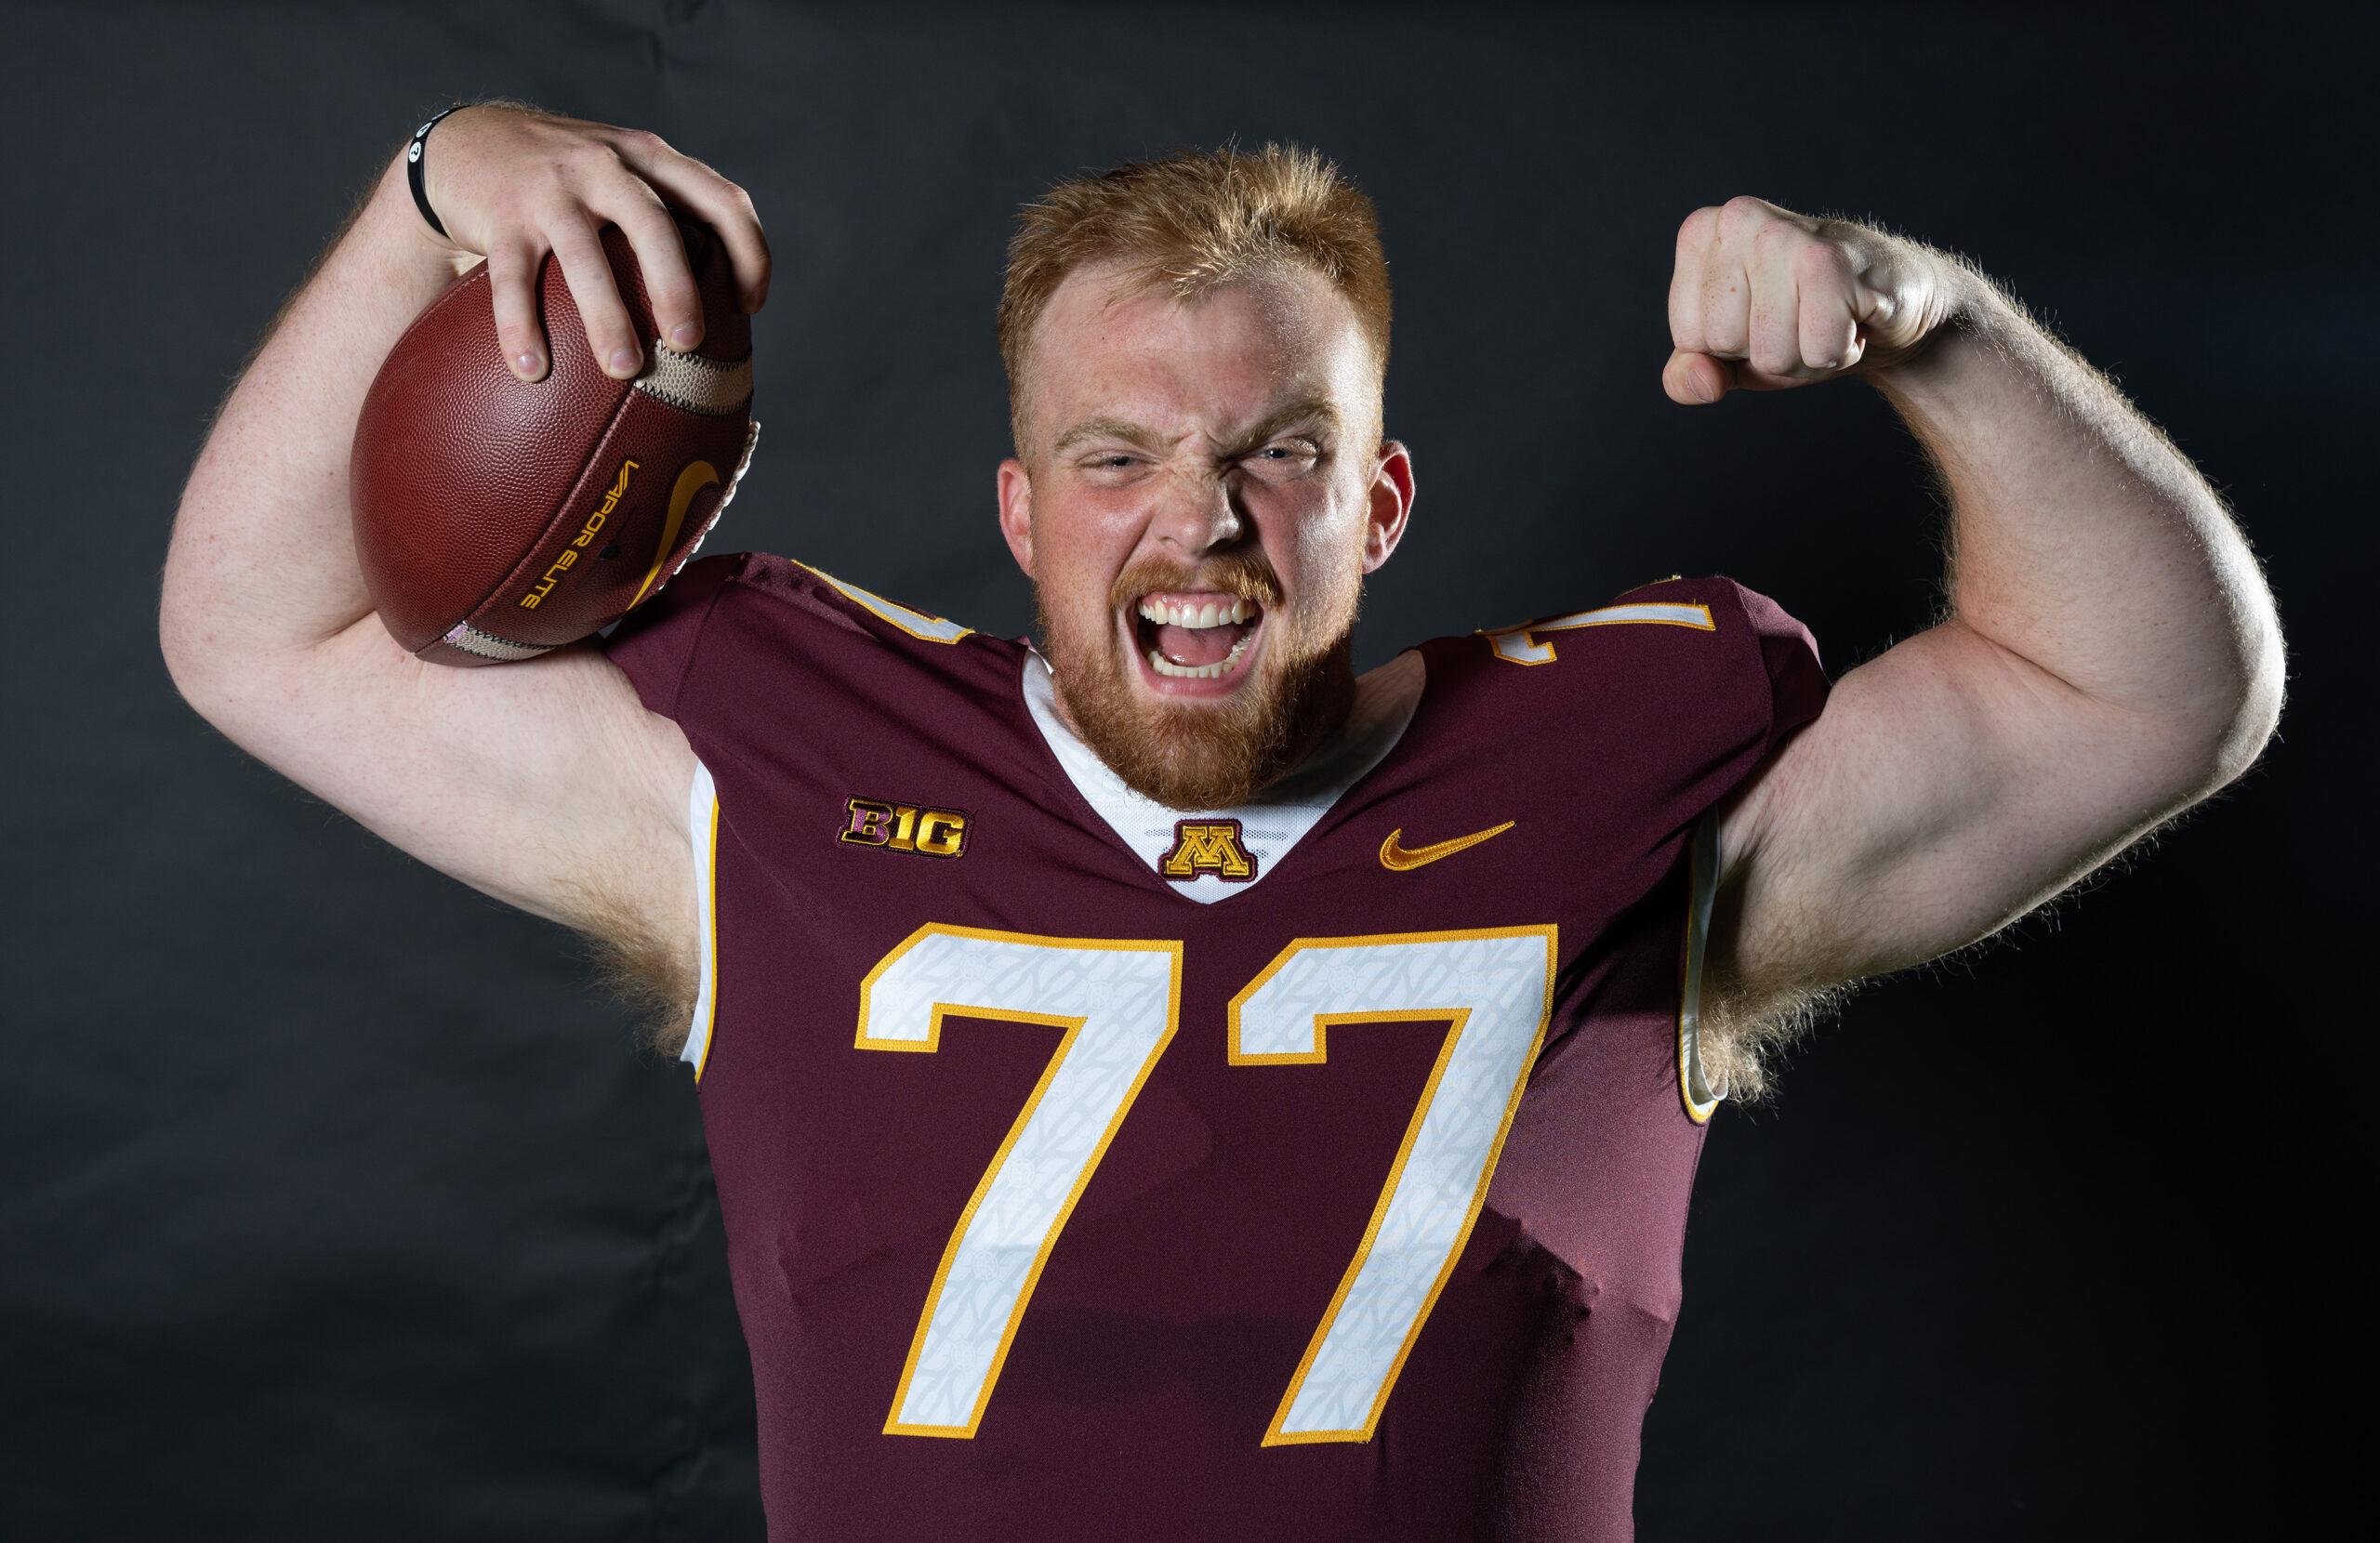 Quinn Carroll the former transfer tackle now at Minnesota is a strong player with a solid resume. Check out this scouting report by Hula Bowl scout Jake Kernen.